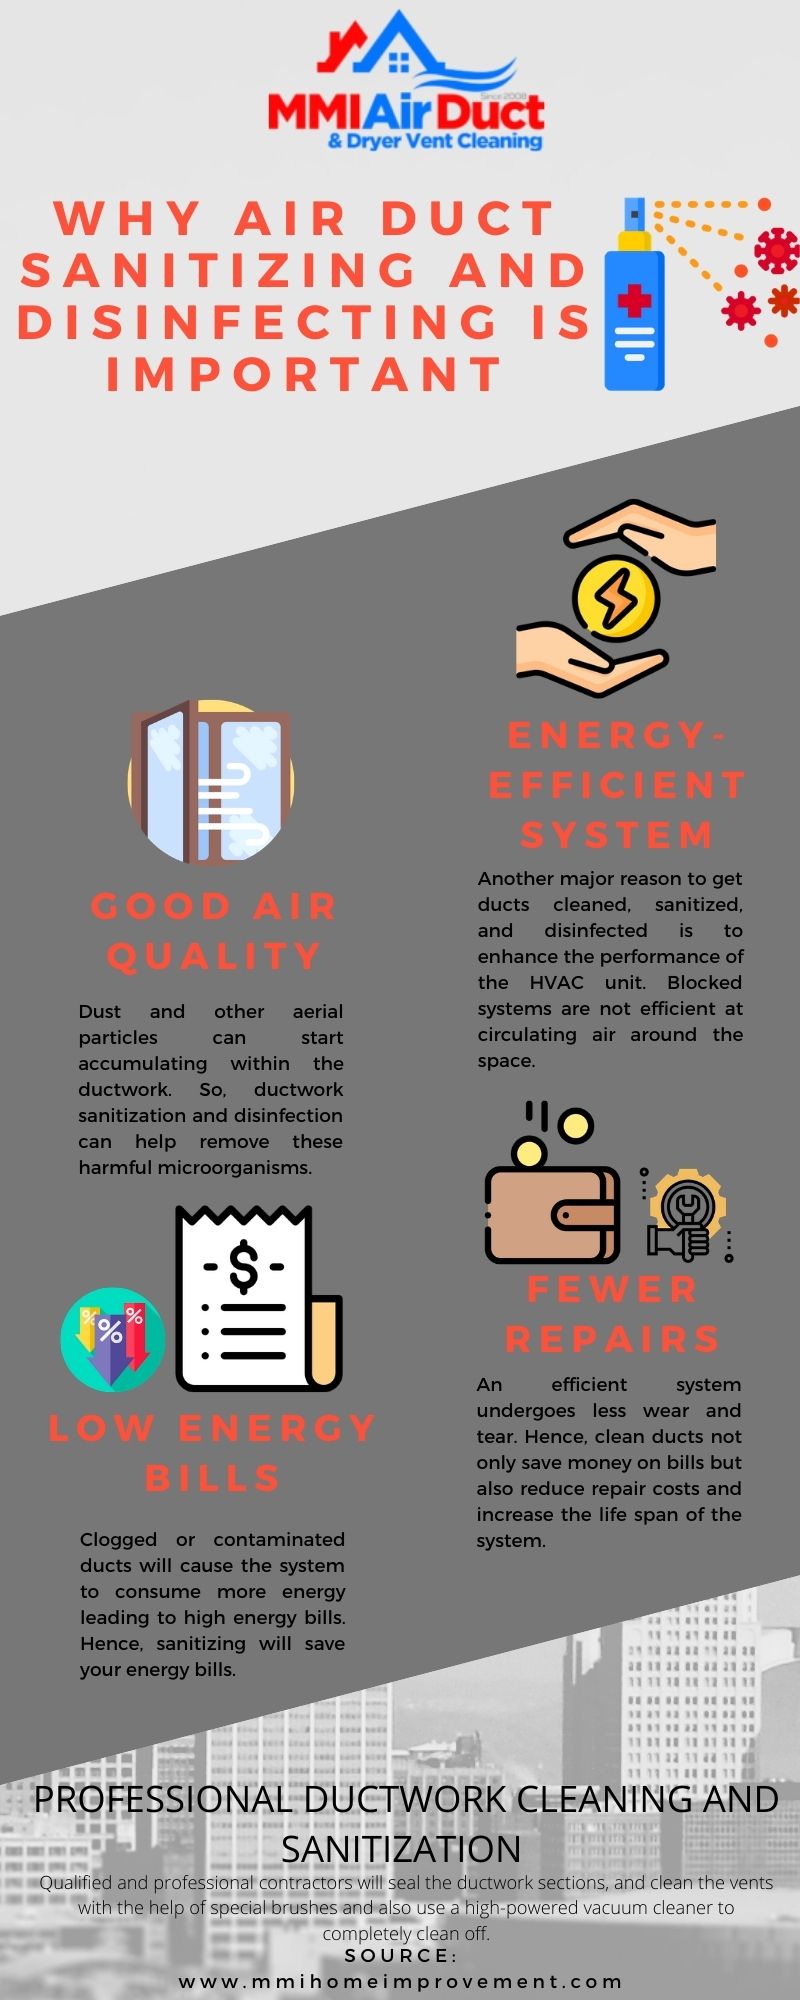 Why Air Duct Sanitizing and Disinfecting is Important - Infograhic